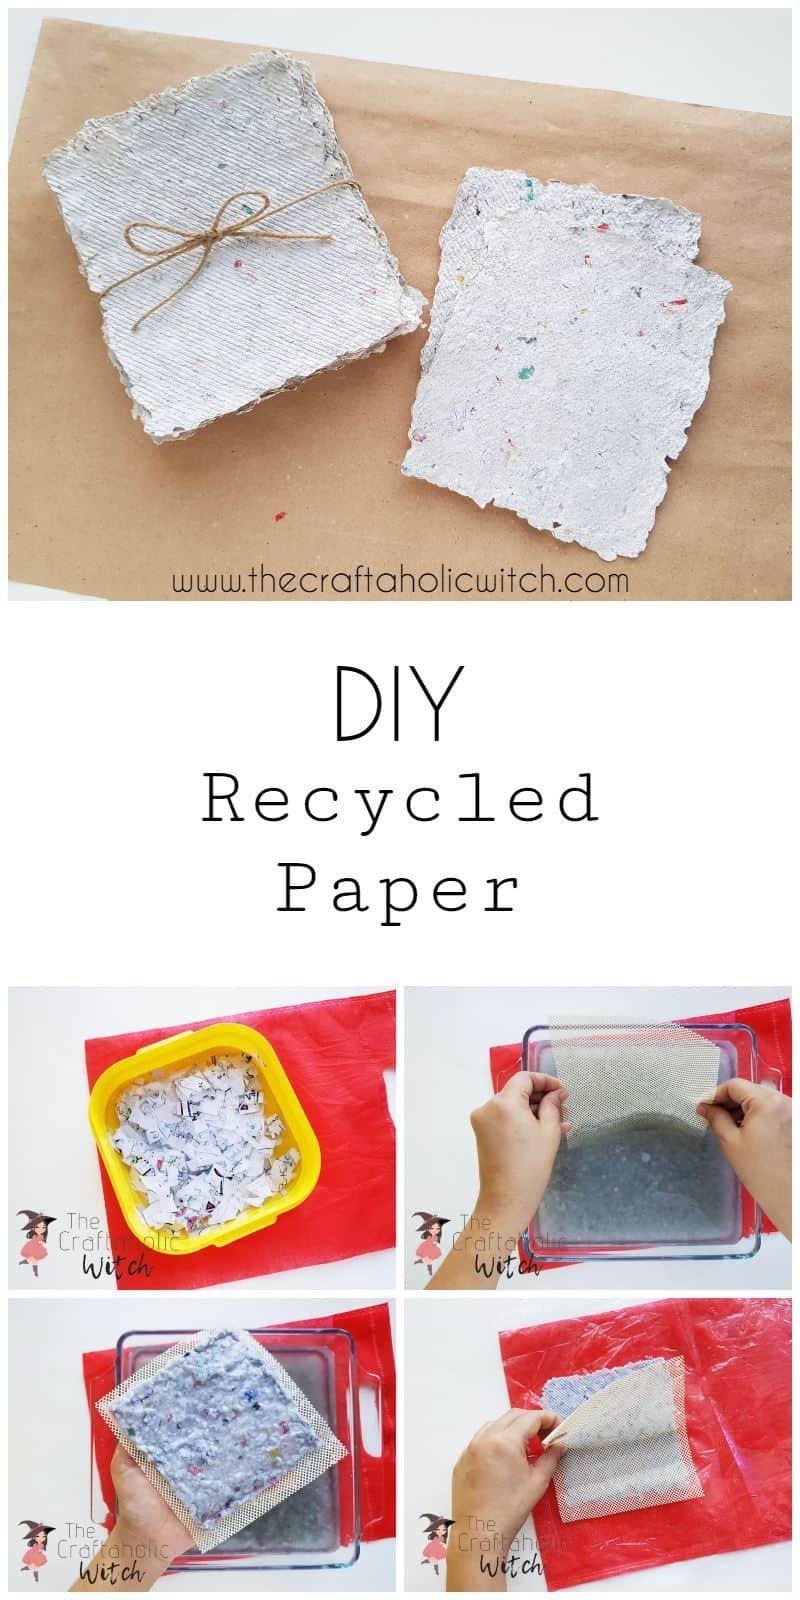 10 Simple Steps To Make Your Own Paper